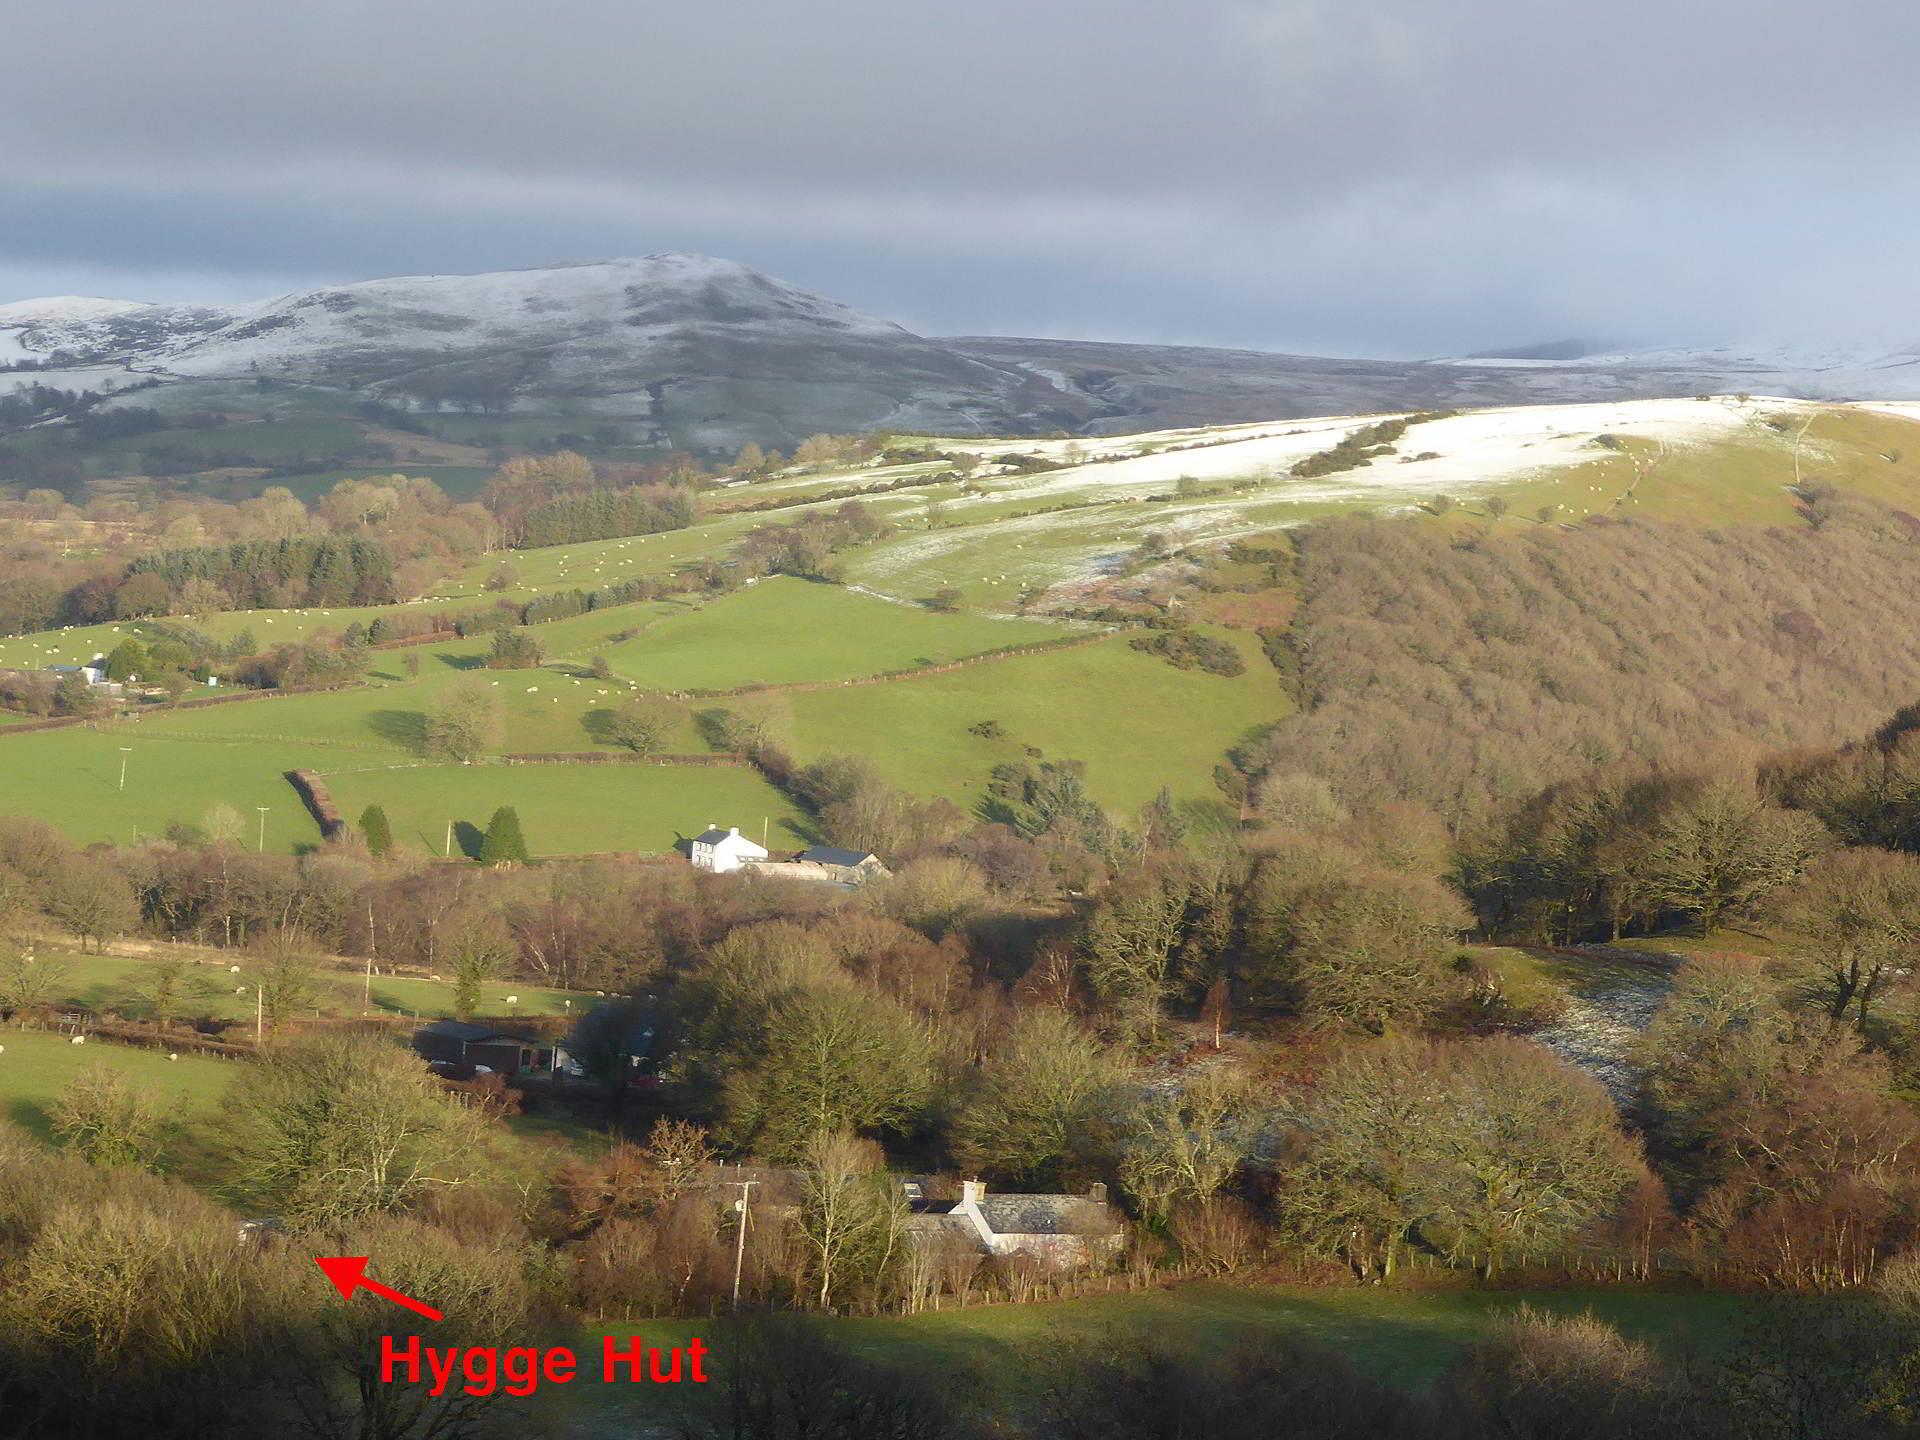 Hygge Hut and Cambrian Mountains